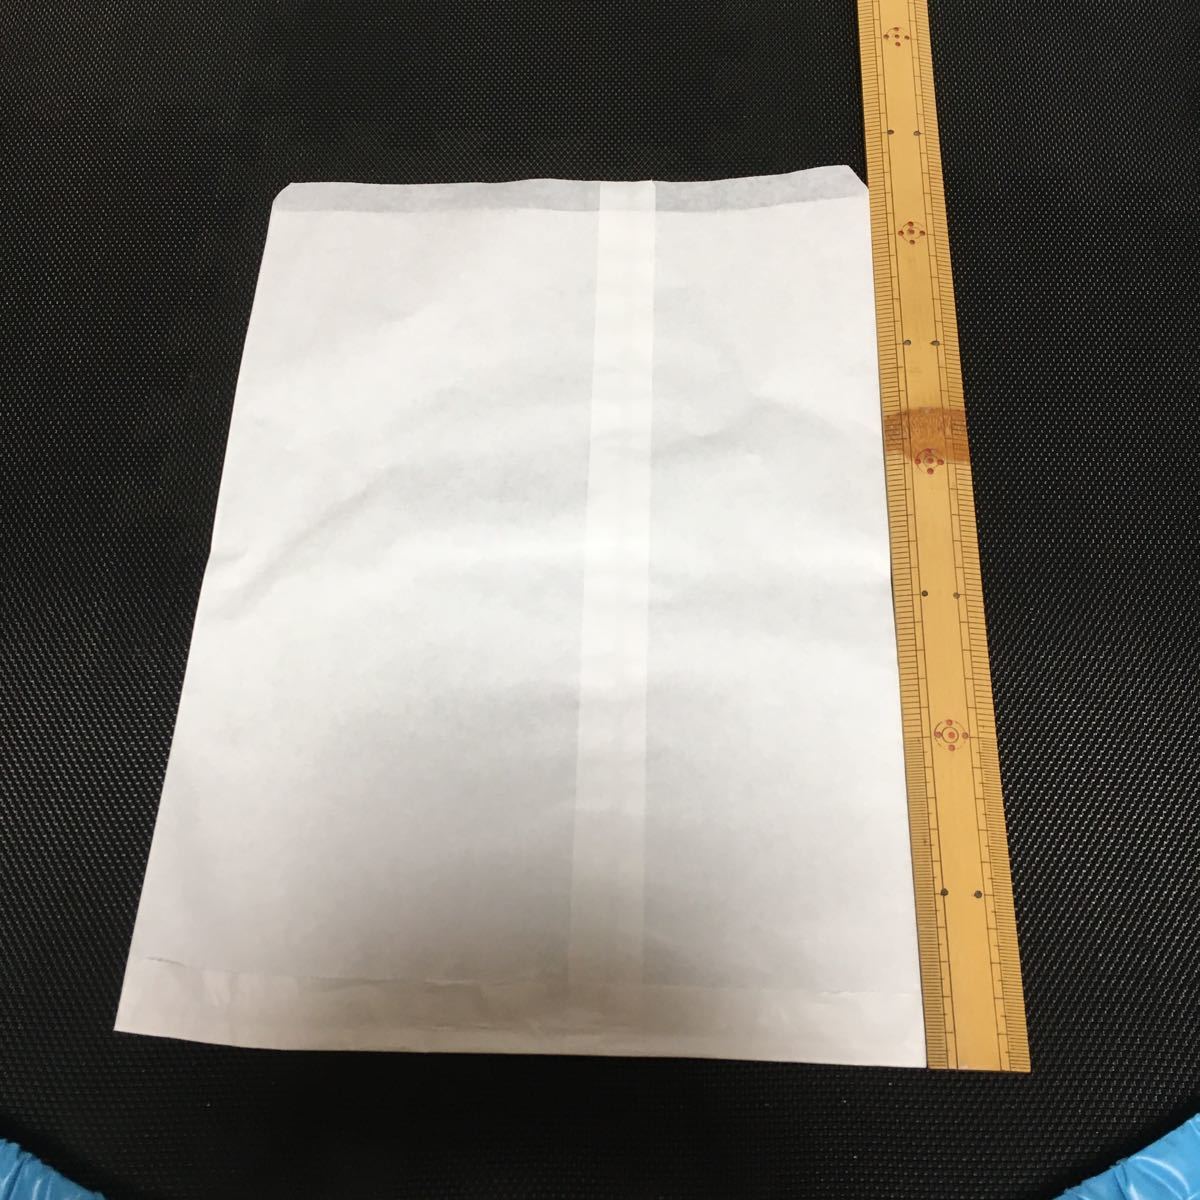  new goods paper bag envelope white plain wrapping 100 sheets 1 sheets 10 jpy!